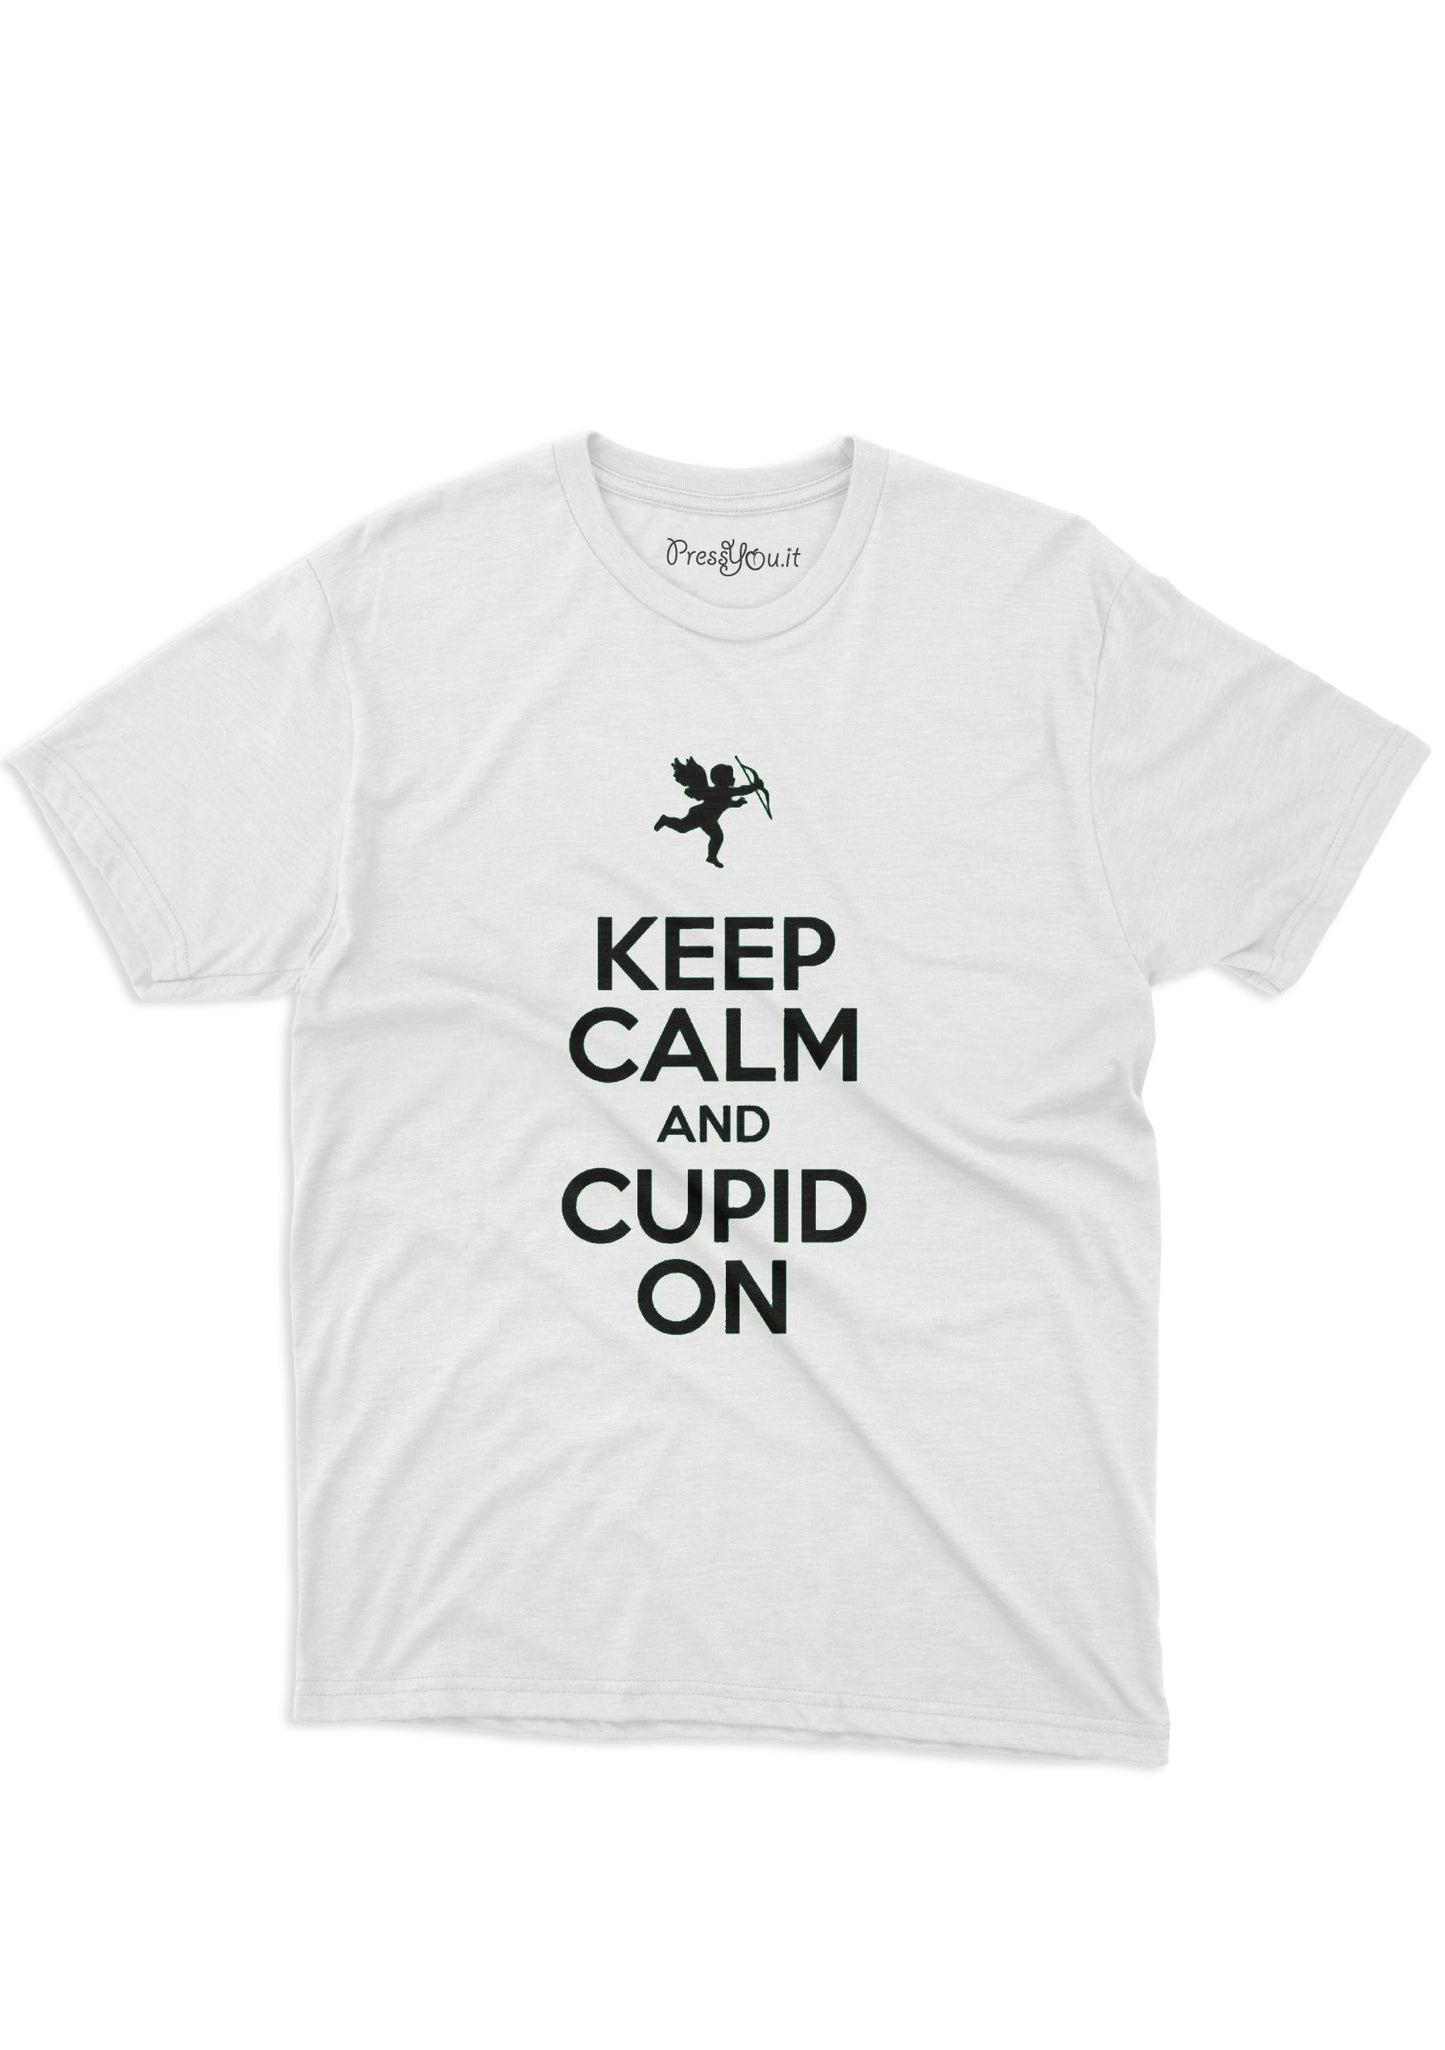 maglietta t-shirt-keep calm and cupid on amore san valentino